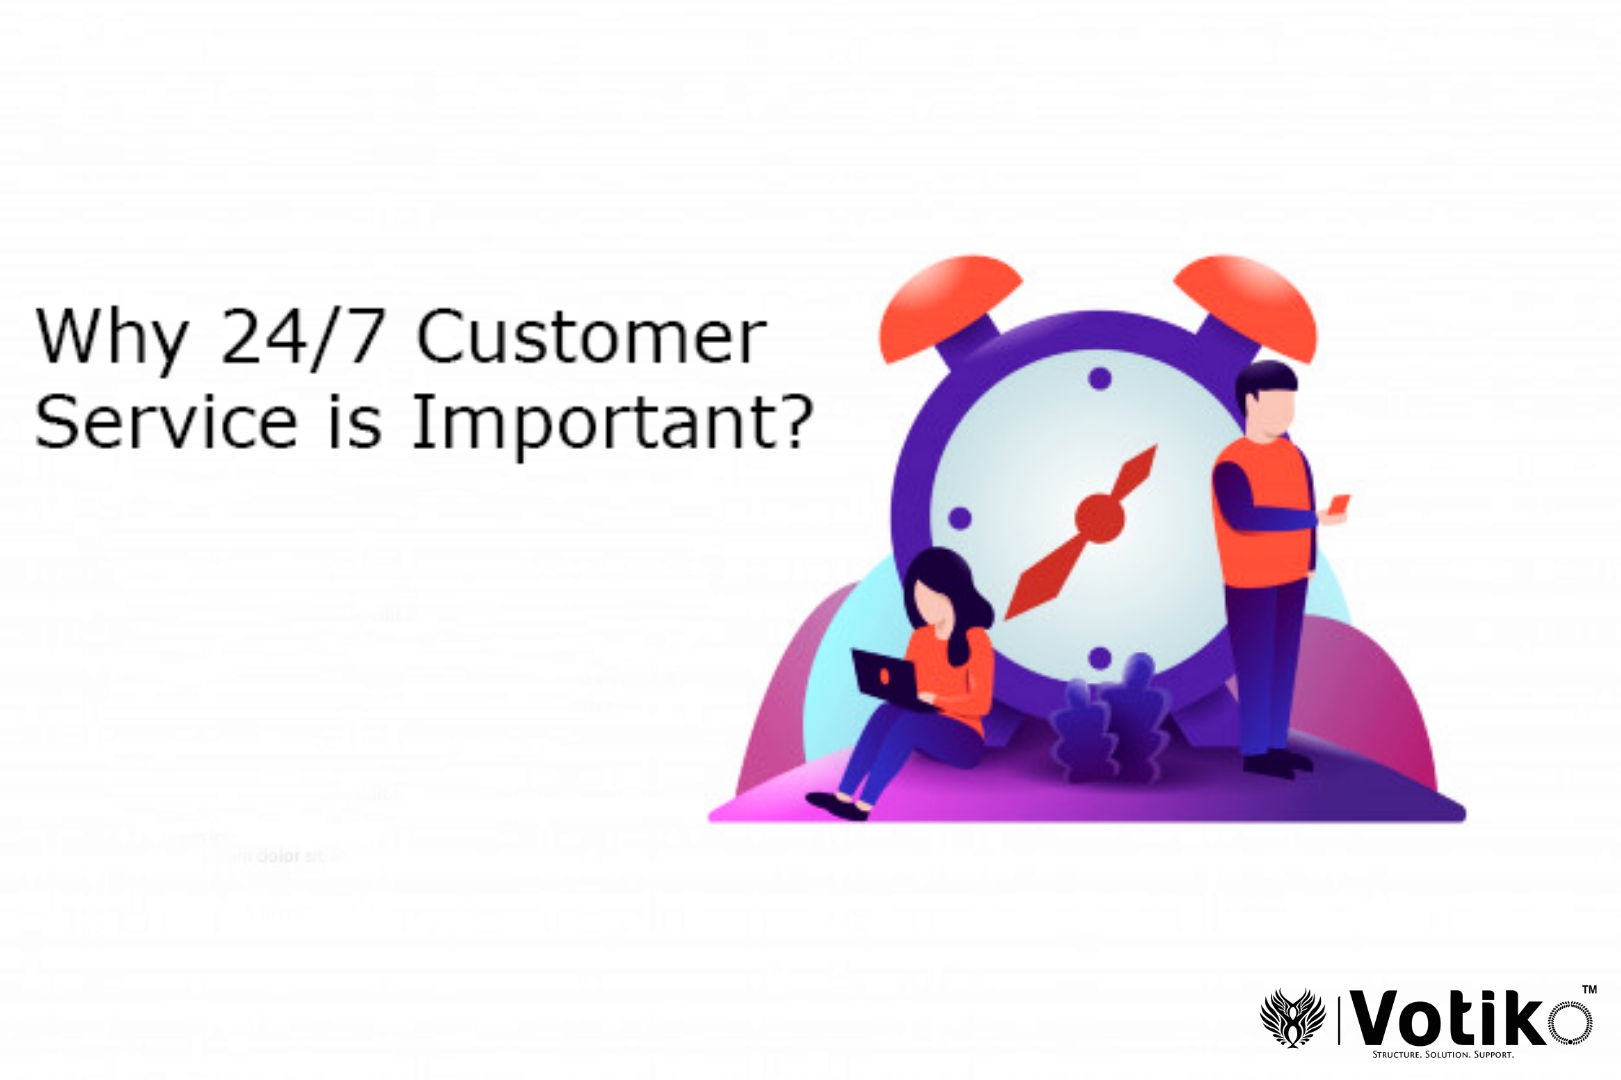 Why is it critical to provide customer service 24/7